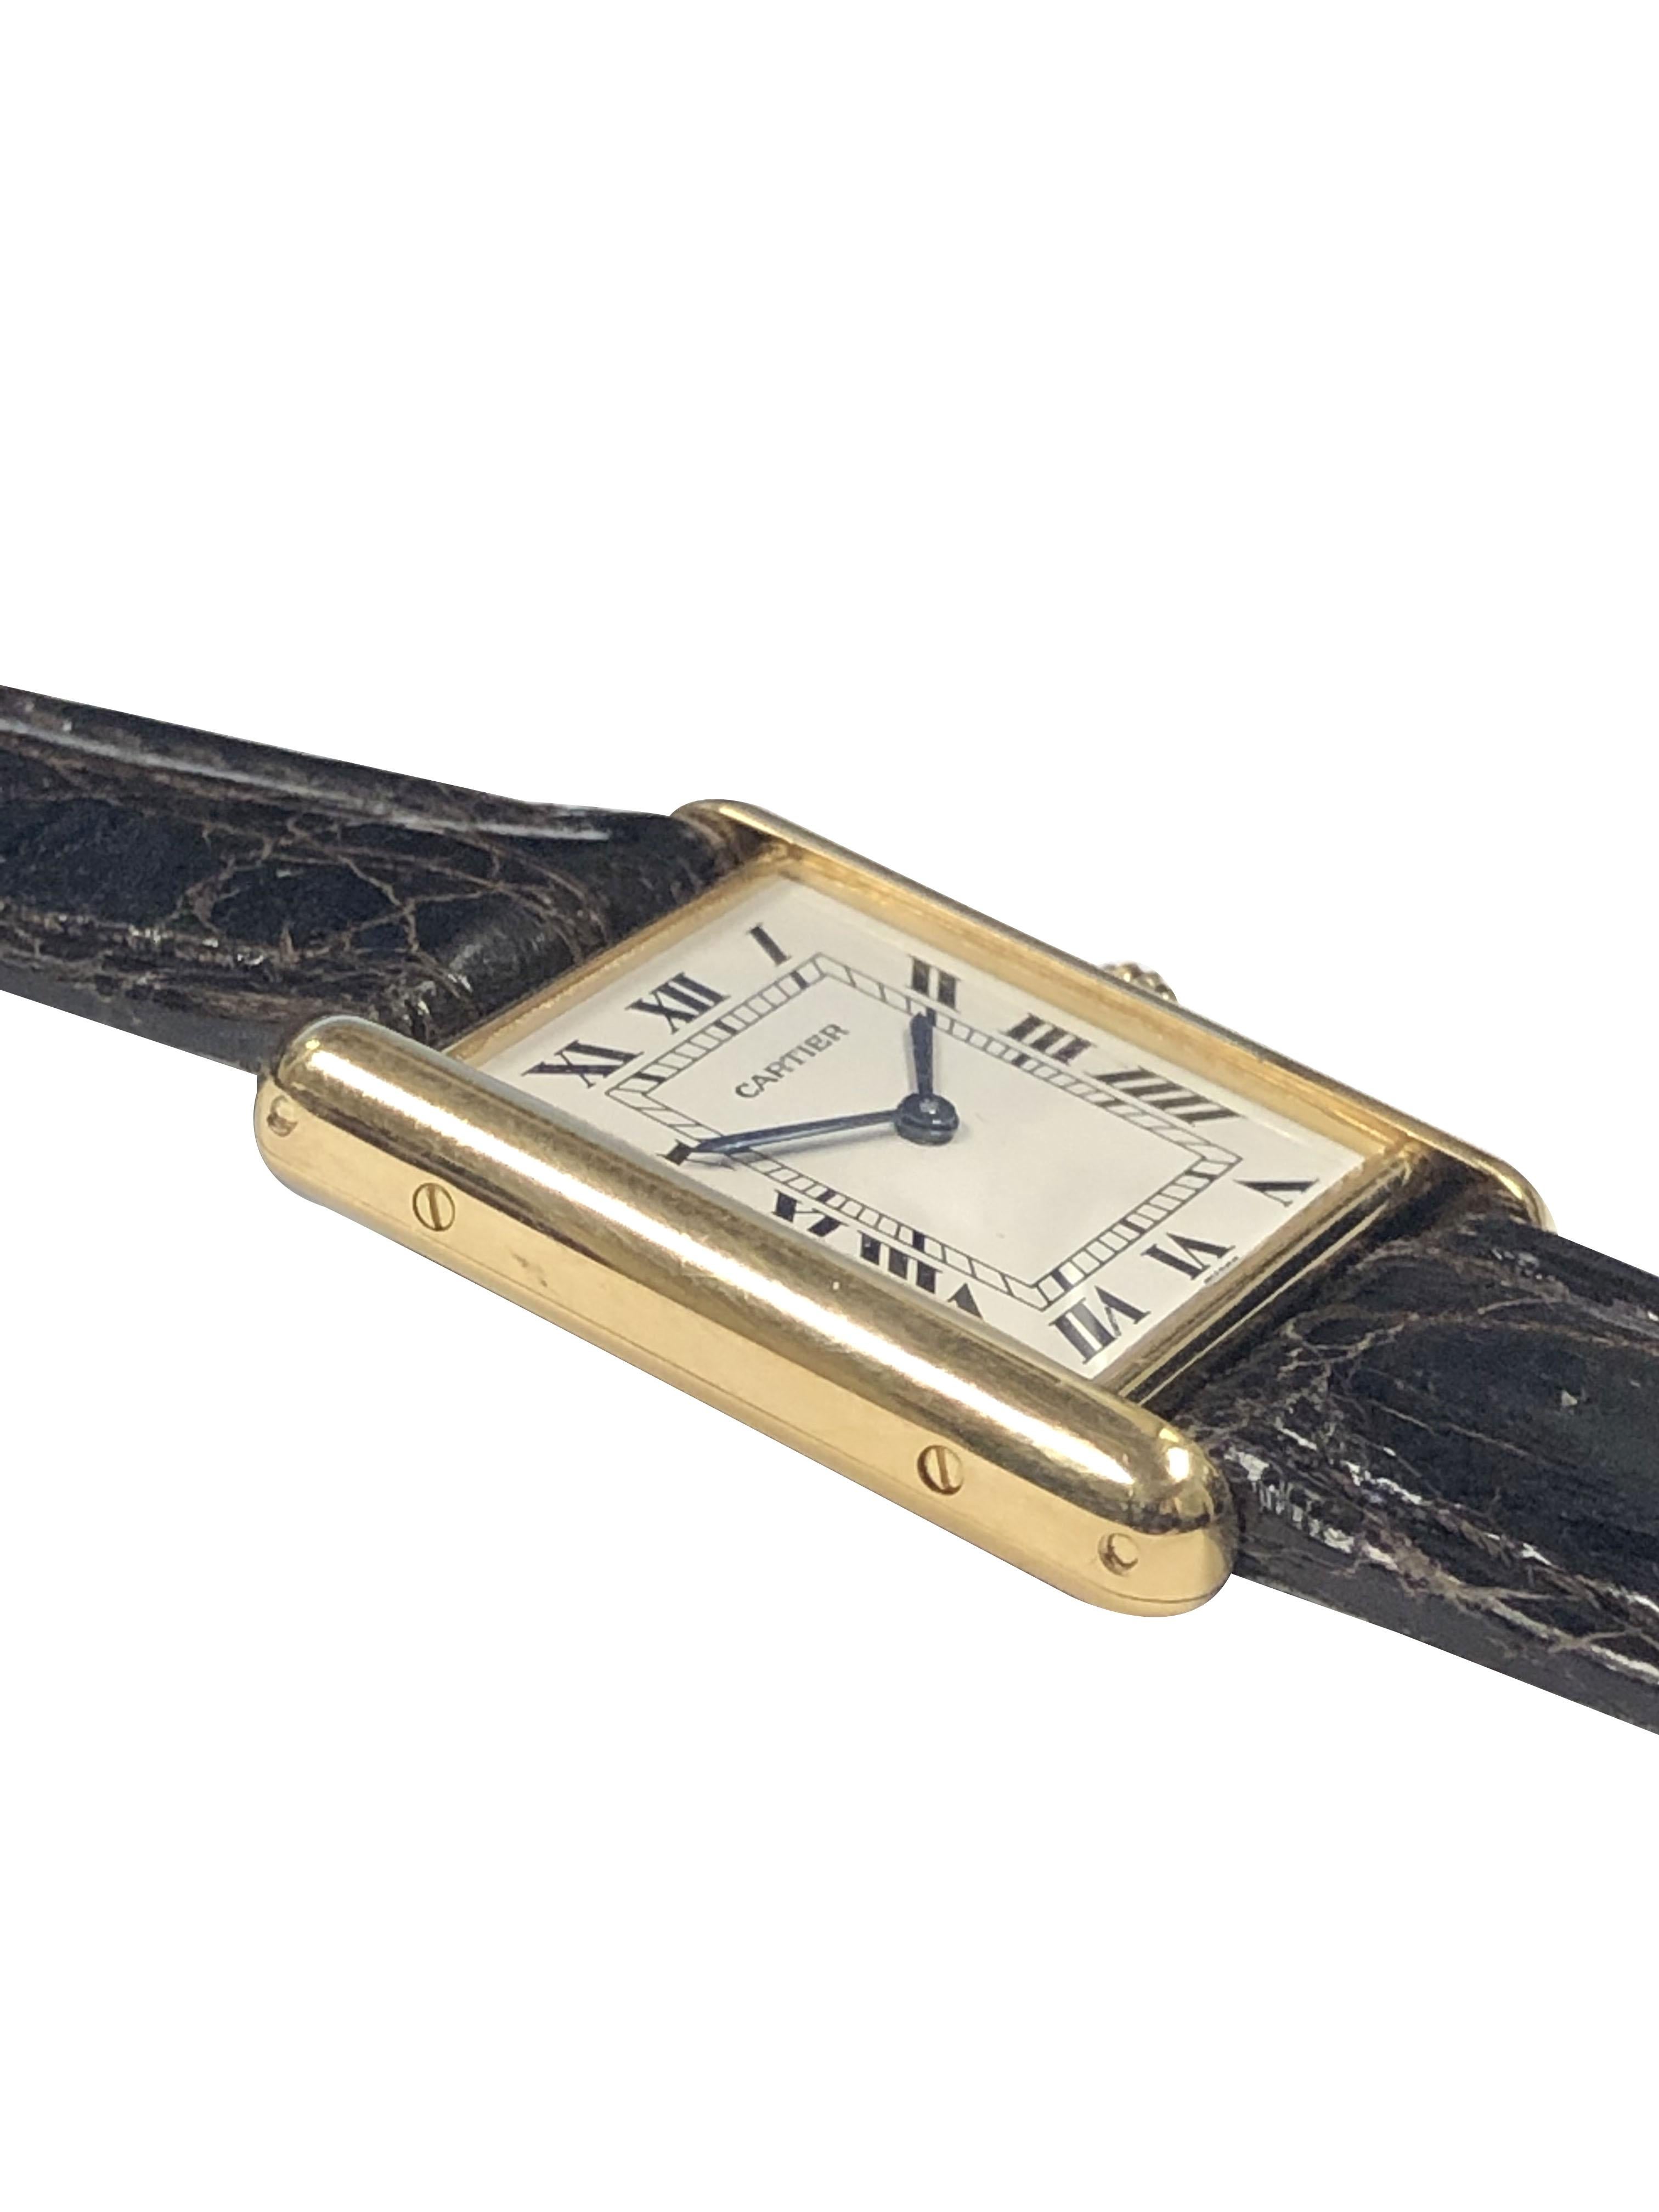 Circa 2000 Cartier Louis Cartier mid size Tank Wrist Watch, 30 X 23 M.M. 2 Piec e 18K yellow Gold case, Quartz movement, Sapphire Crown, White Dial with Black Roman numerals. New Brown Crocodile stitched strap with a Cartier Gold Plate Tang Buckle.